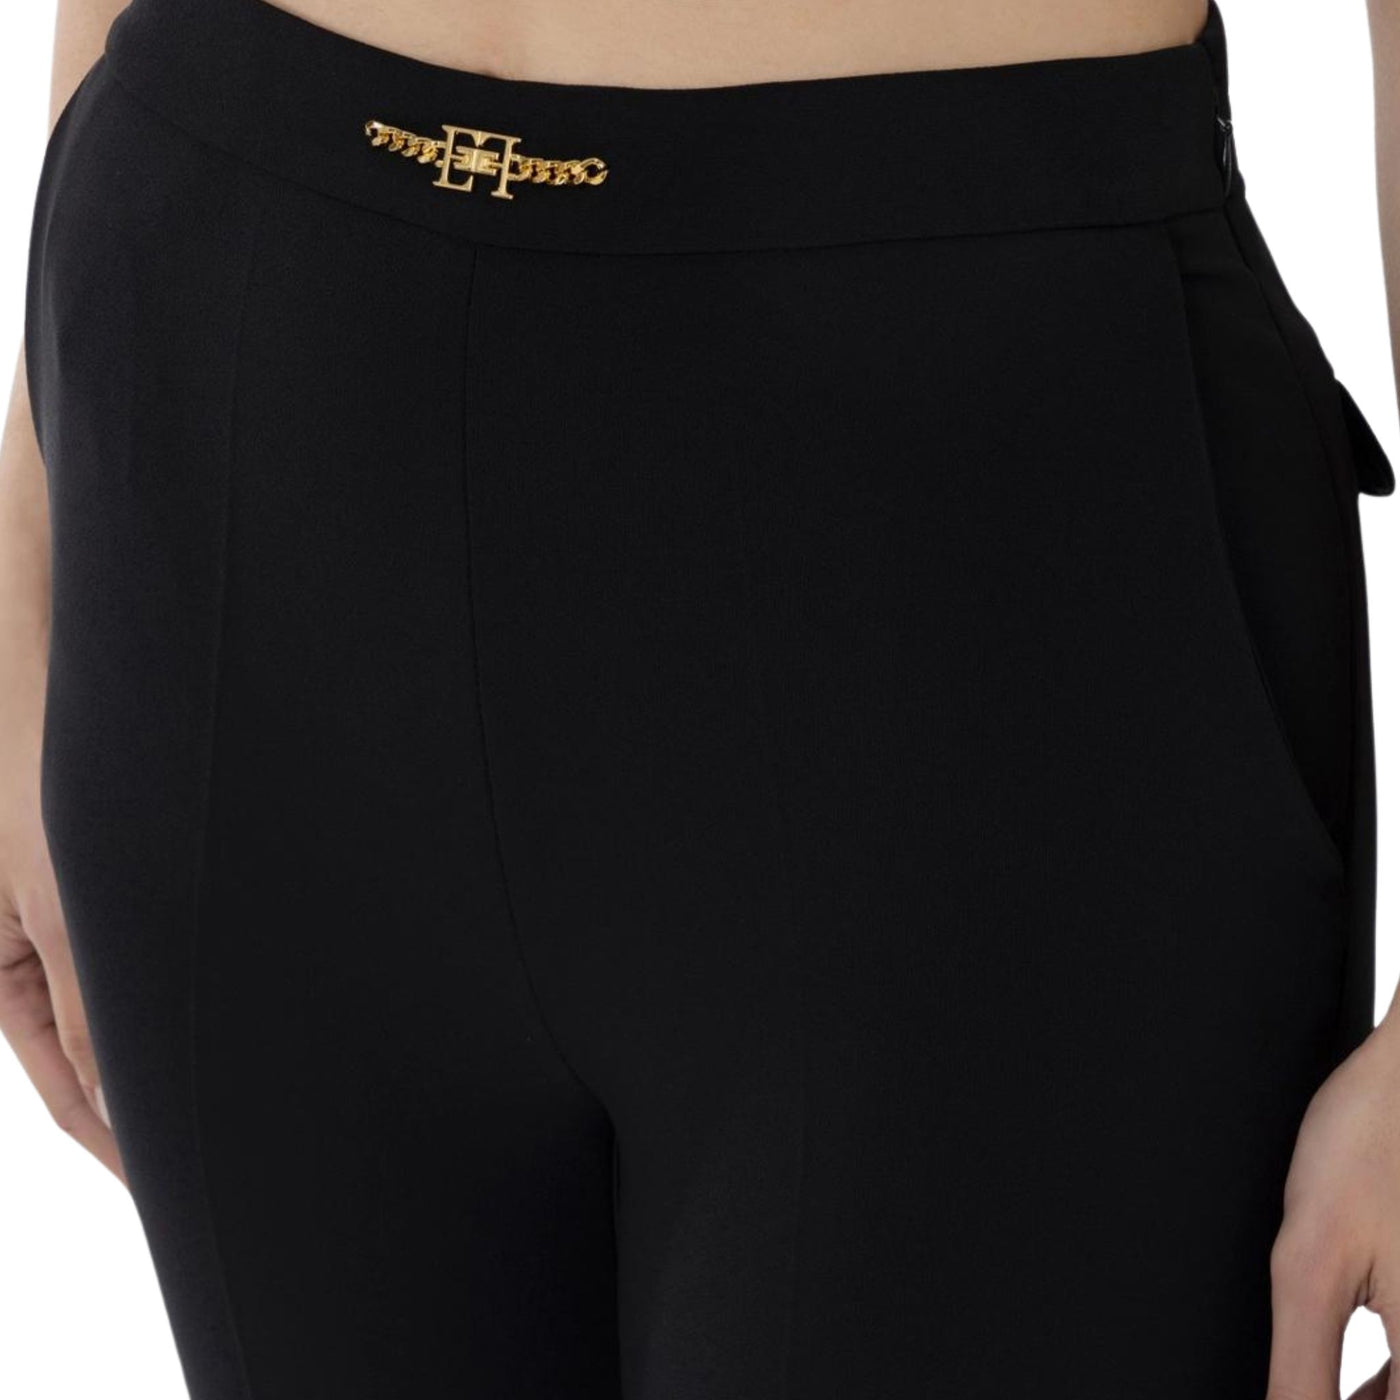 Women's trousers with golden clamp